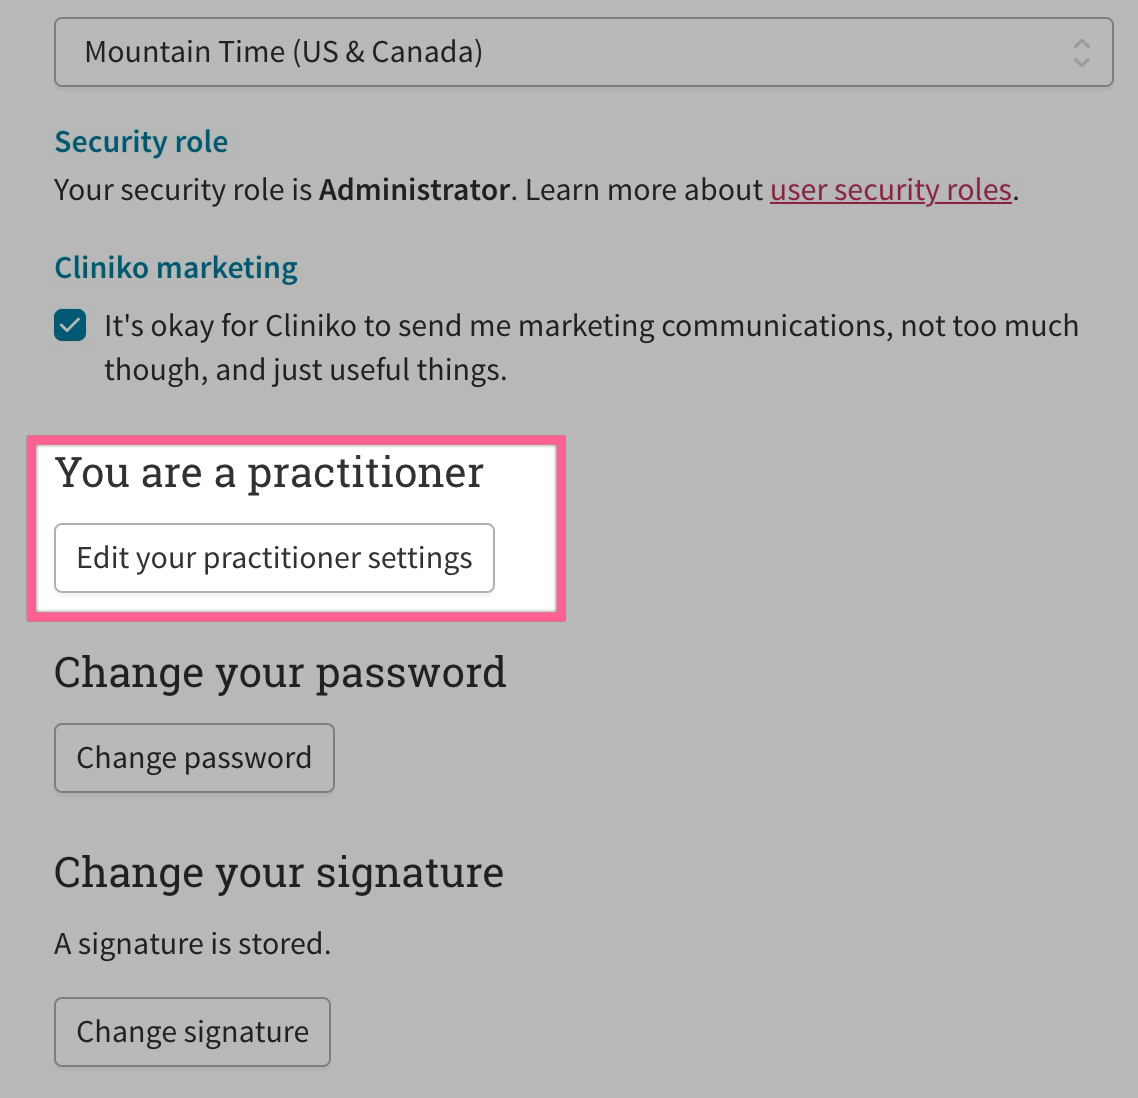 Edit your practitioner settings button